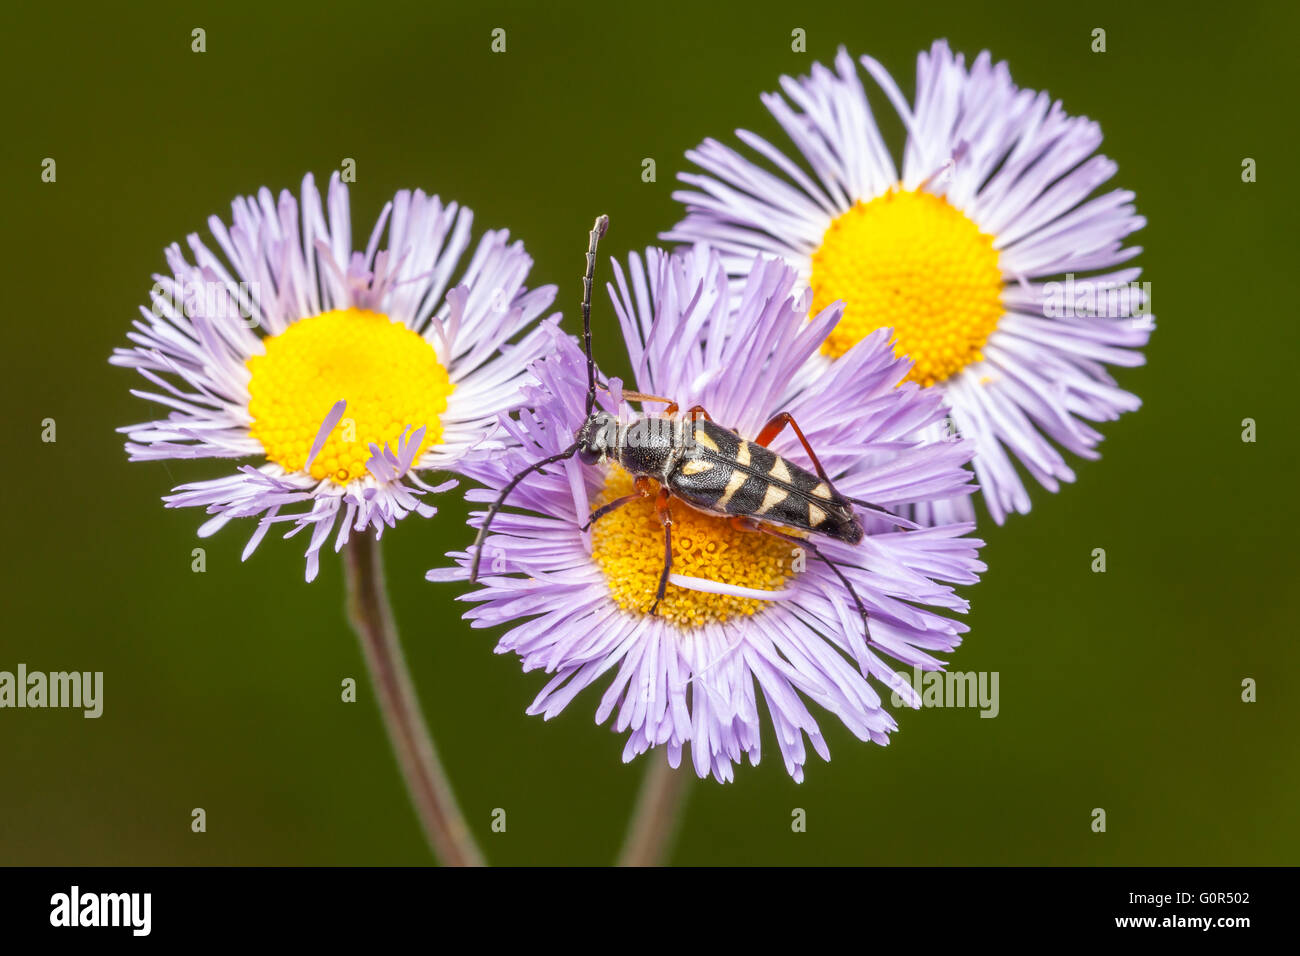 An adult Zebra Longhorn (Typocerus zebra) beetle perches on a violet fleabane flower in search of nectar. Stock Photo